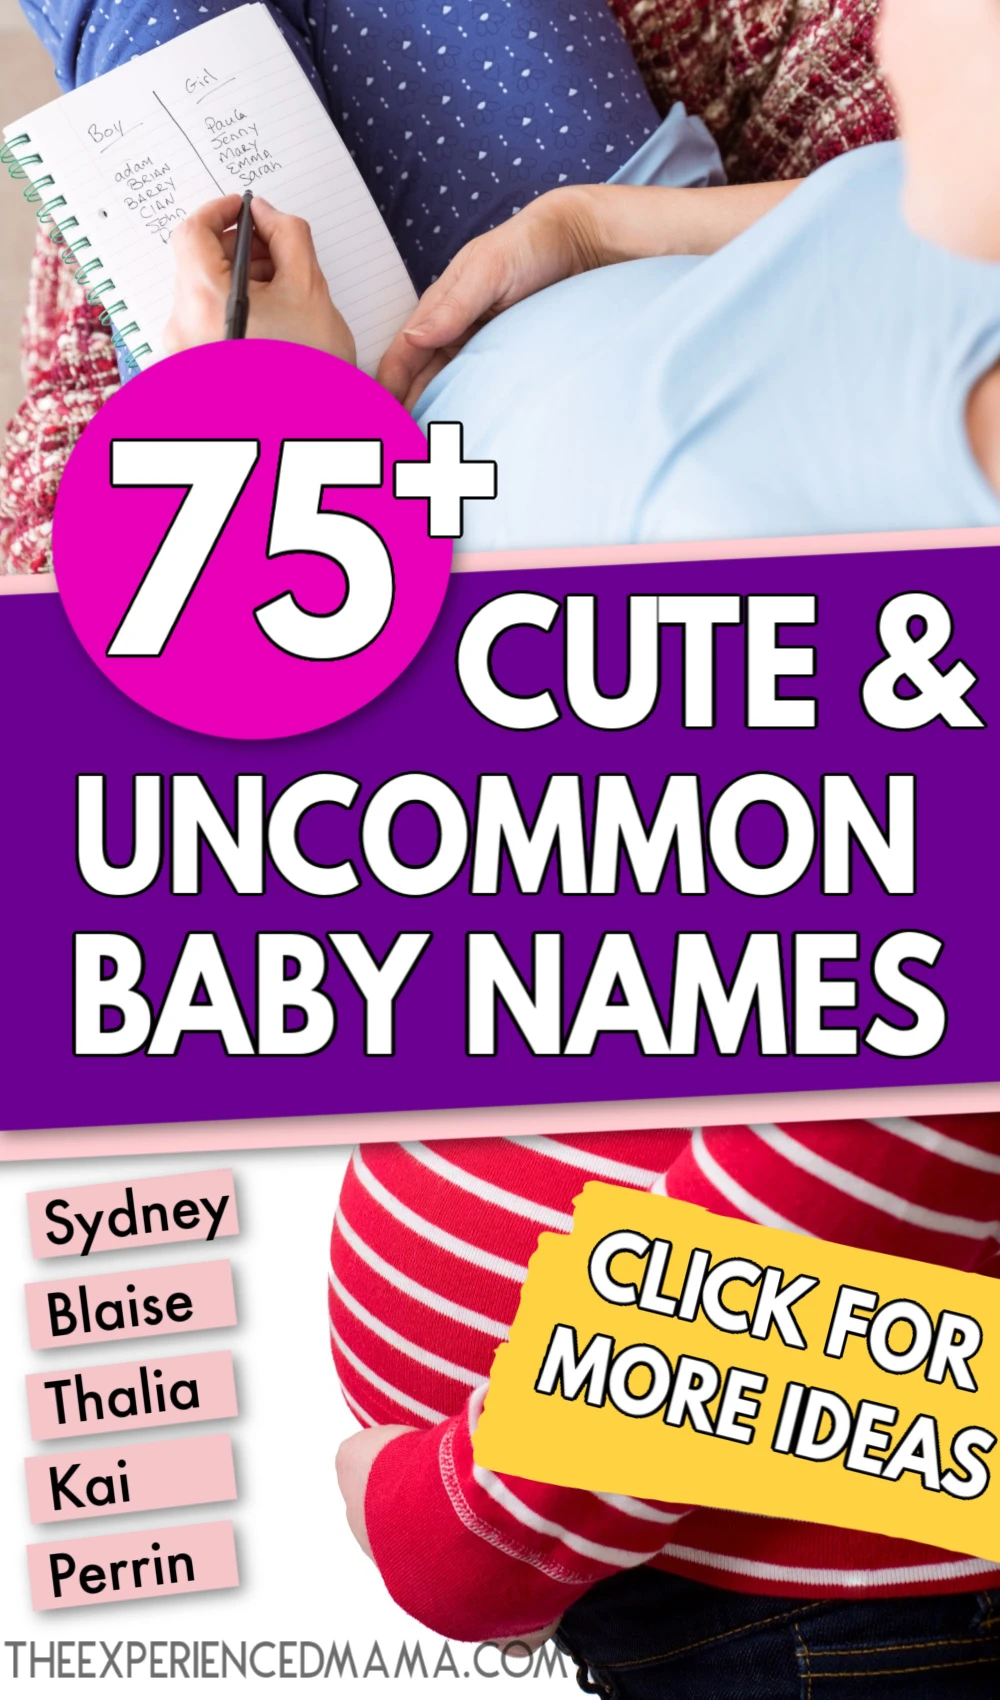 list of cute and unique baby names next to pregnant mom's baby bump with overlay, "75 cute and uncommon baby names"